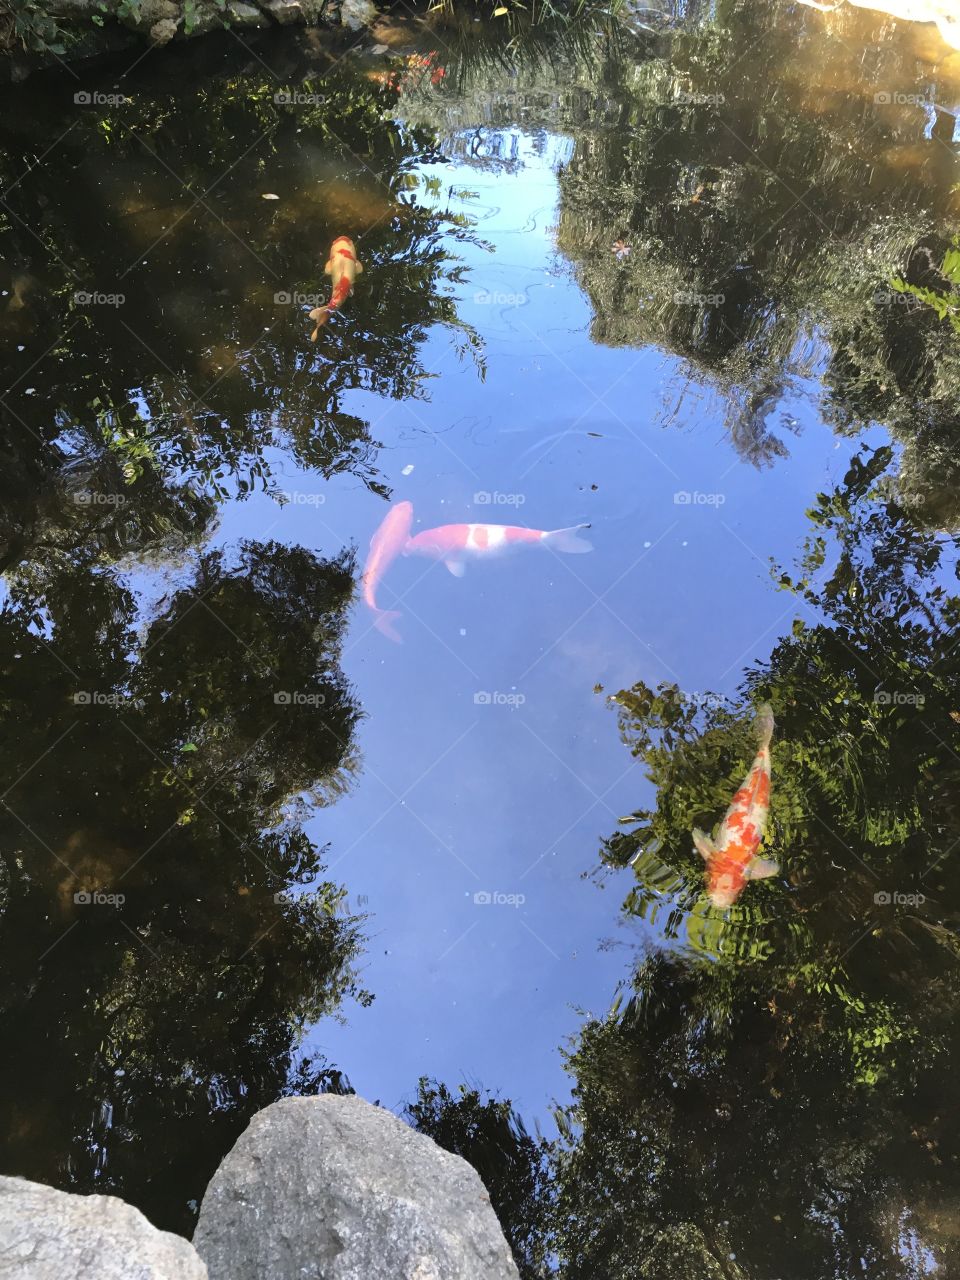 Koi swimming in sky and trees